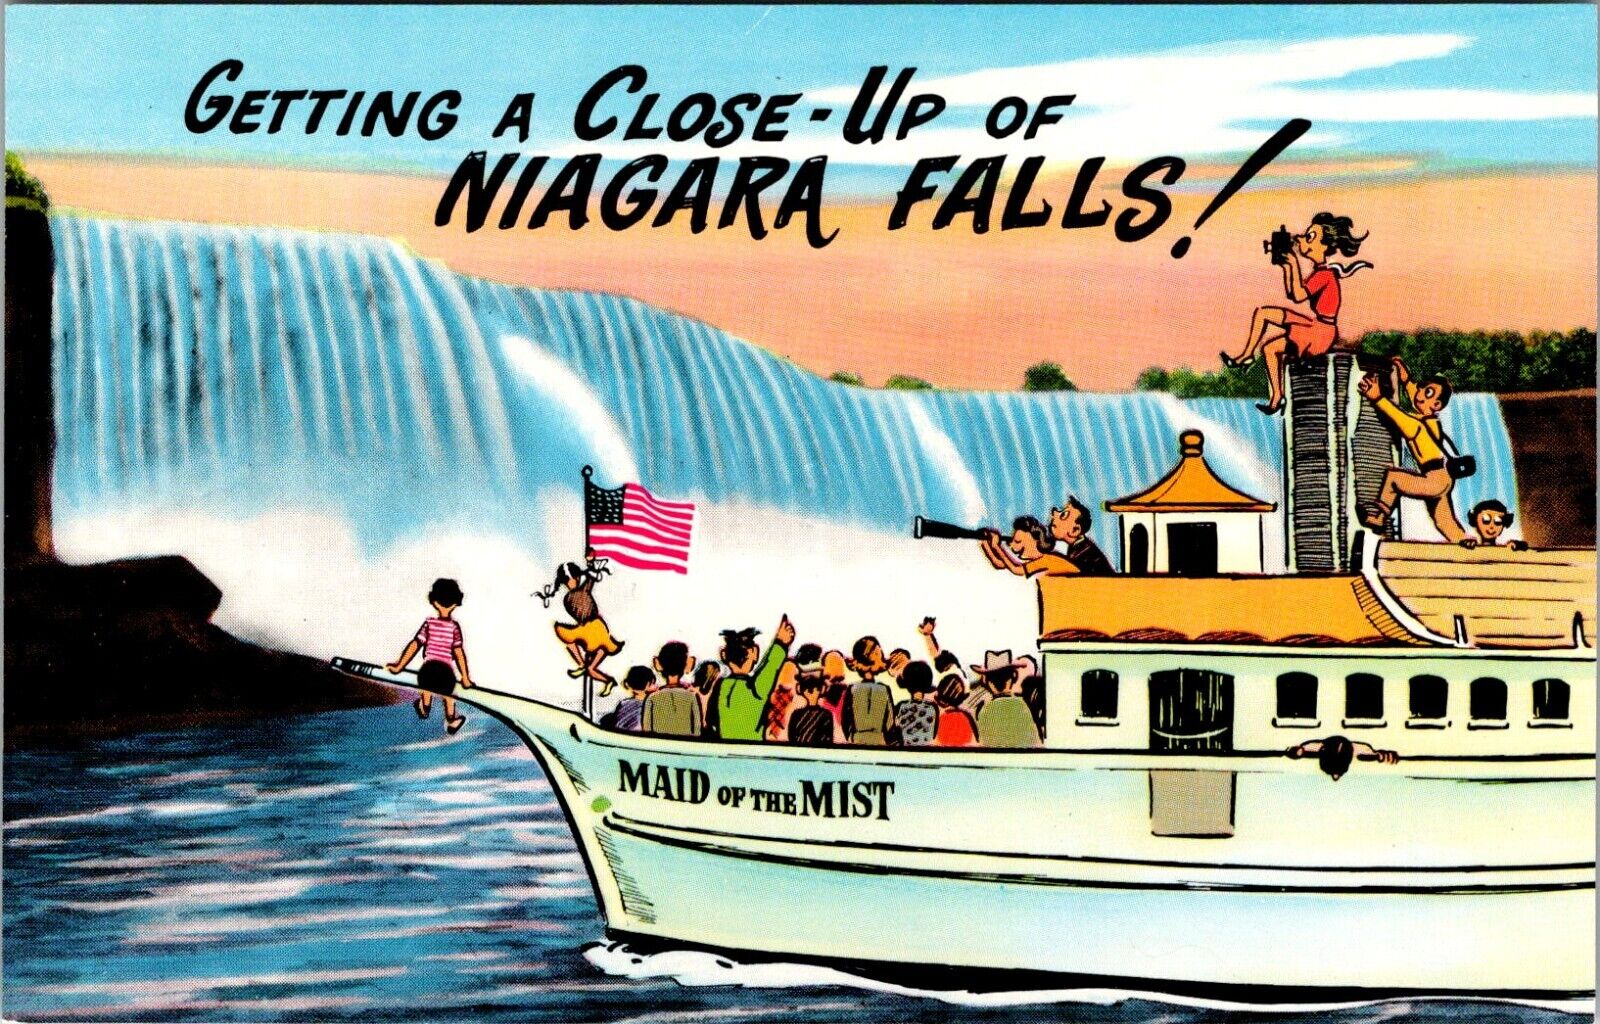 NIAGARA FALLS HUMOR CHROME PC ~ GETTING A CLOSE-UP OF THE FALLS MAID OF THE MIST